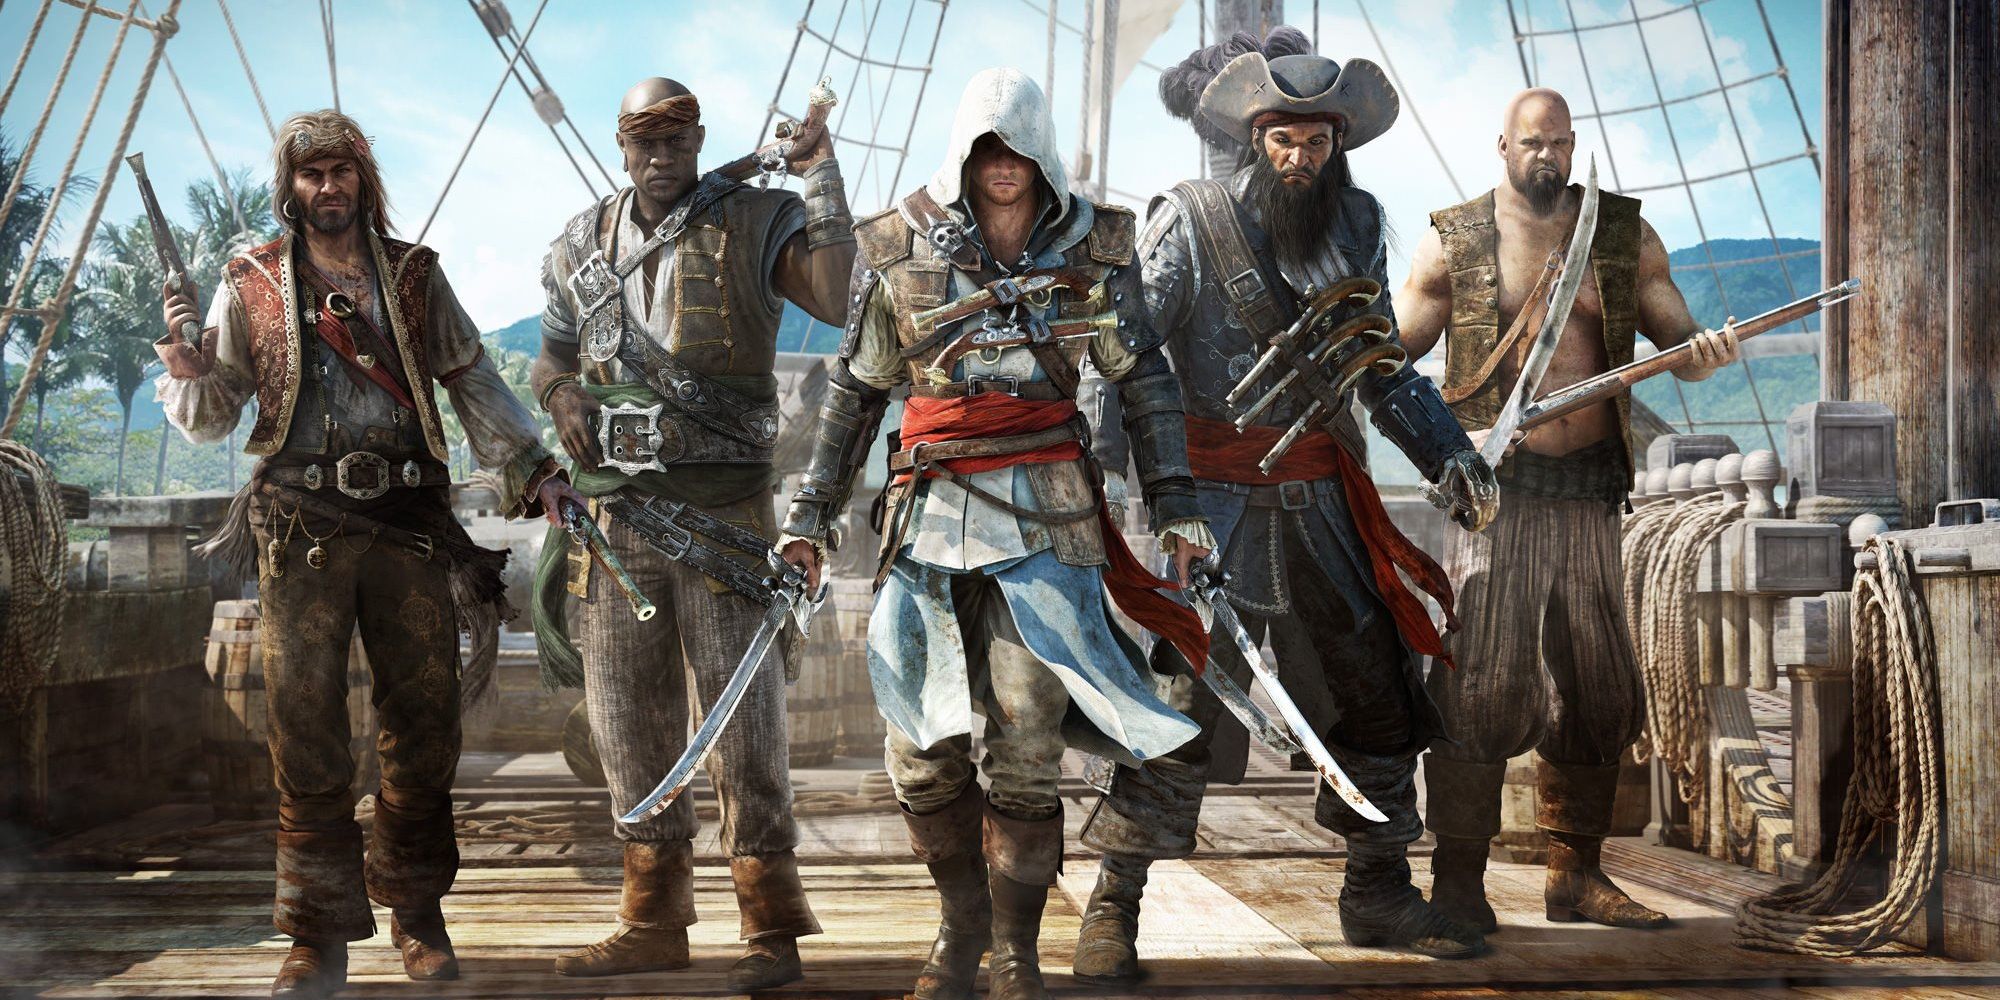 Edward Kenway walking with an entourage of pirates including Quartermaster Adewale and Blackbeard on the deck of a ship. 